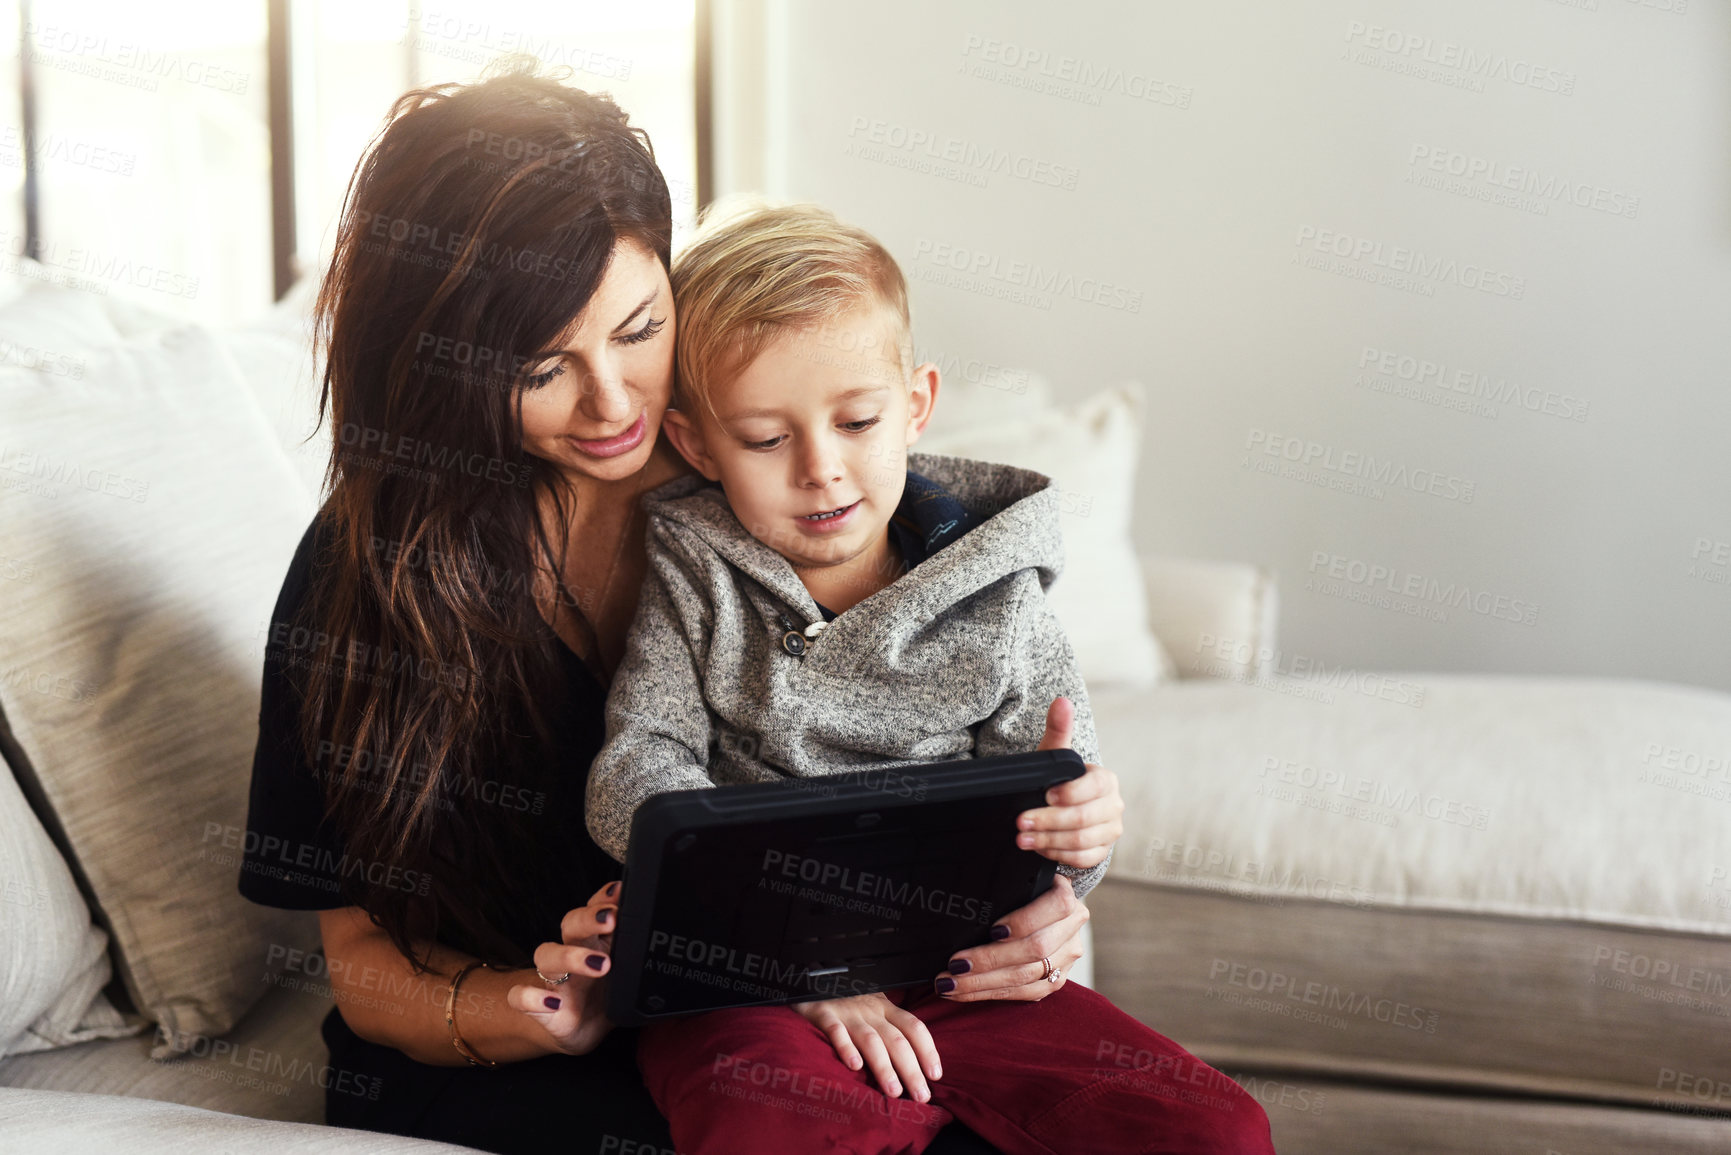 Buy stock photo Shot of a carefree young woman browsing on a digital tablet with her little boy while being seated on a sofa at home during the day